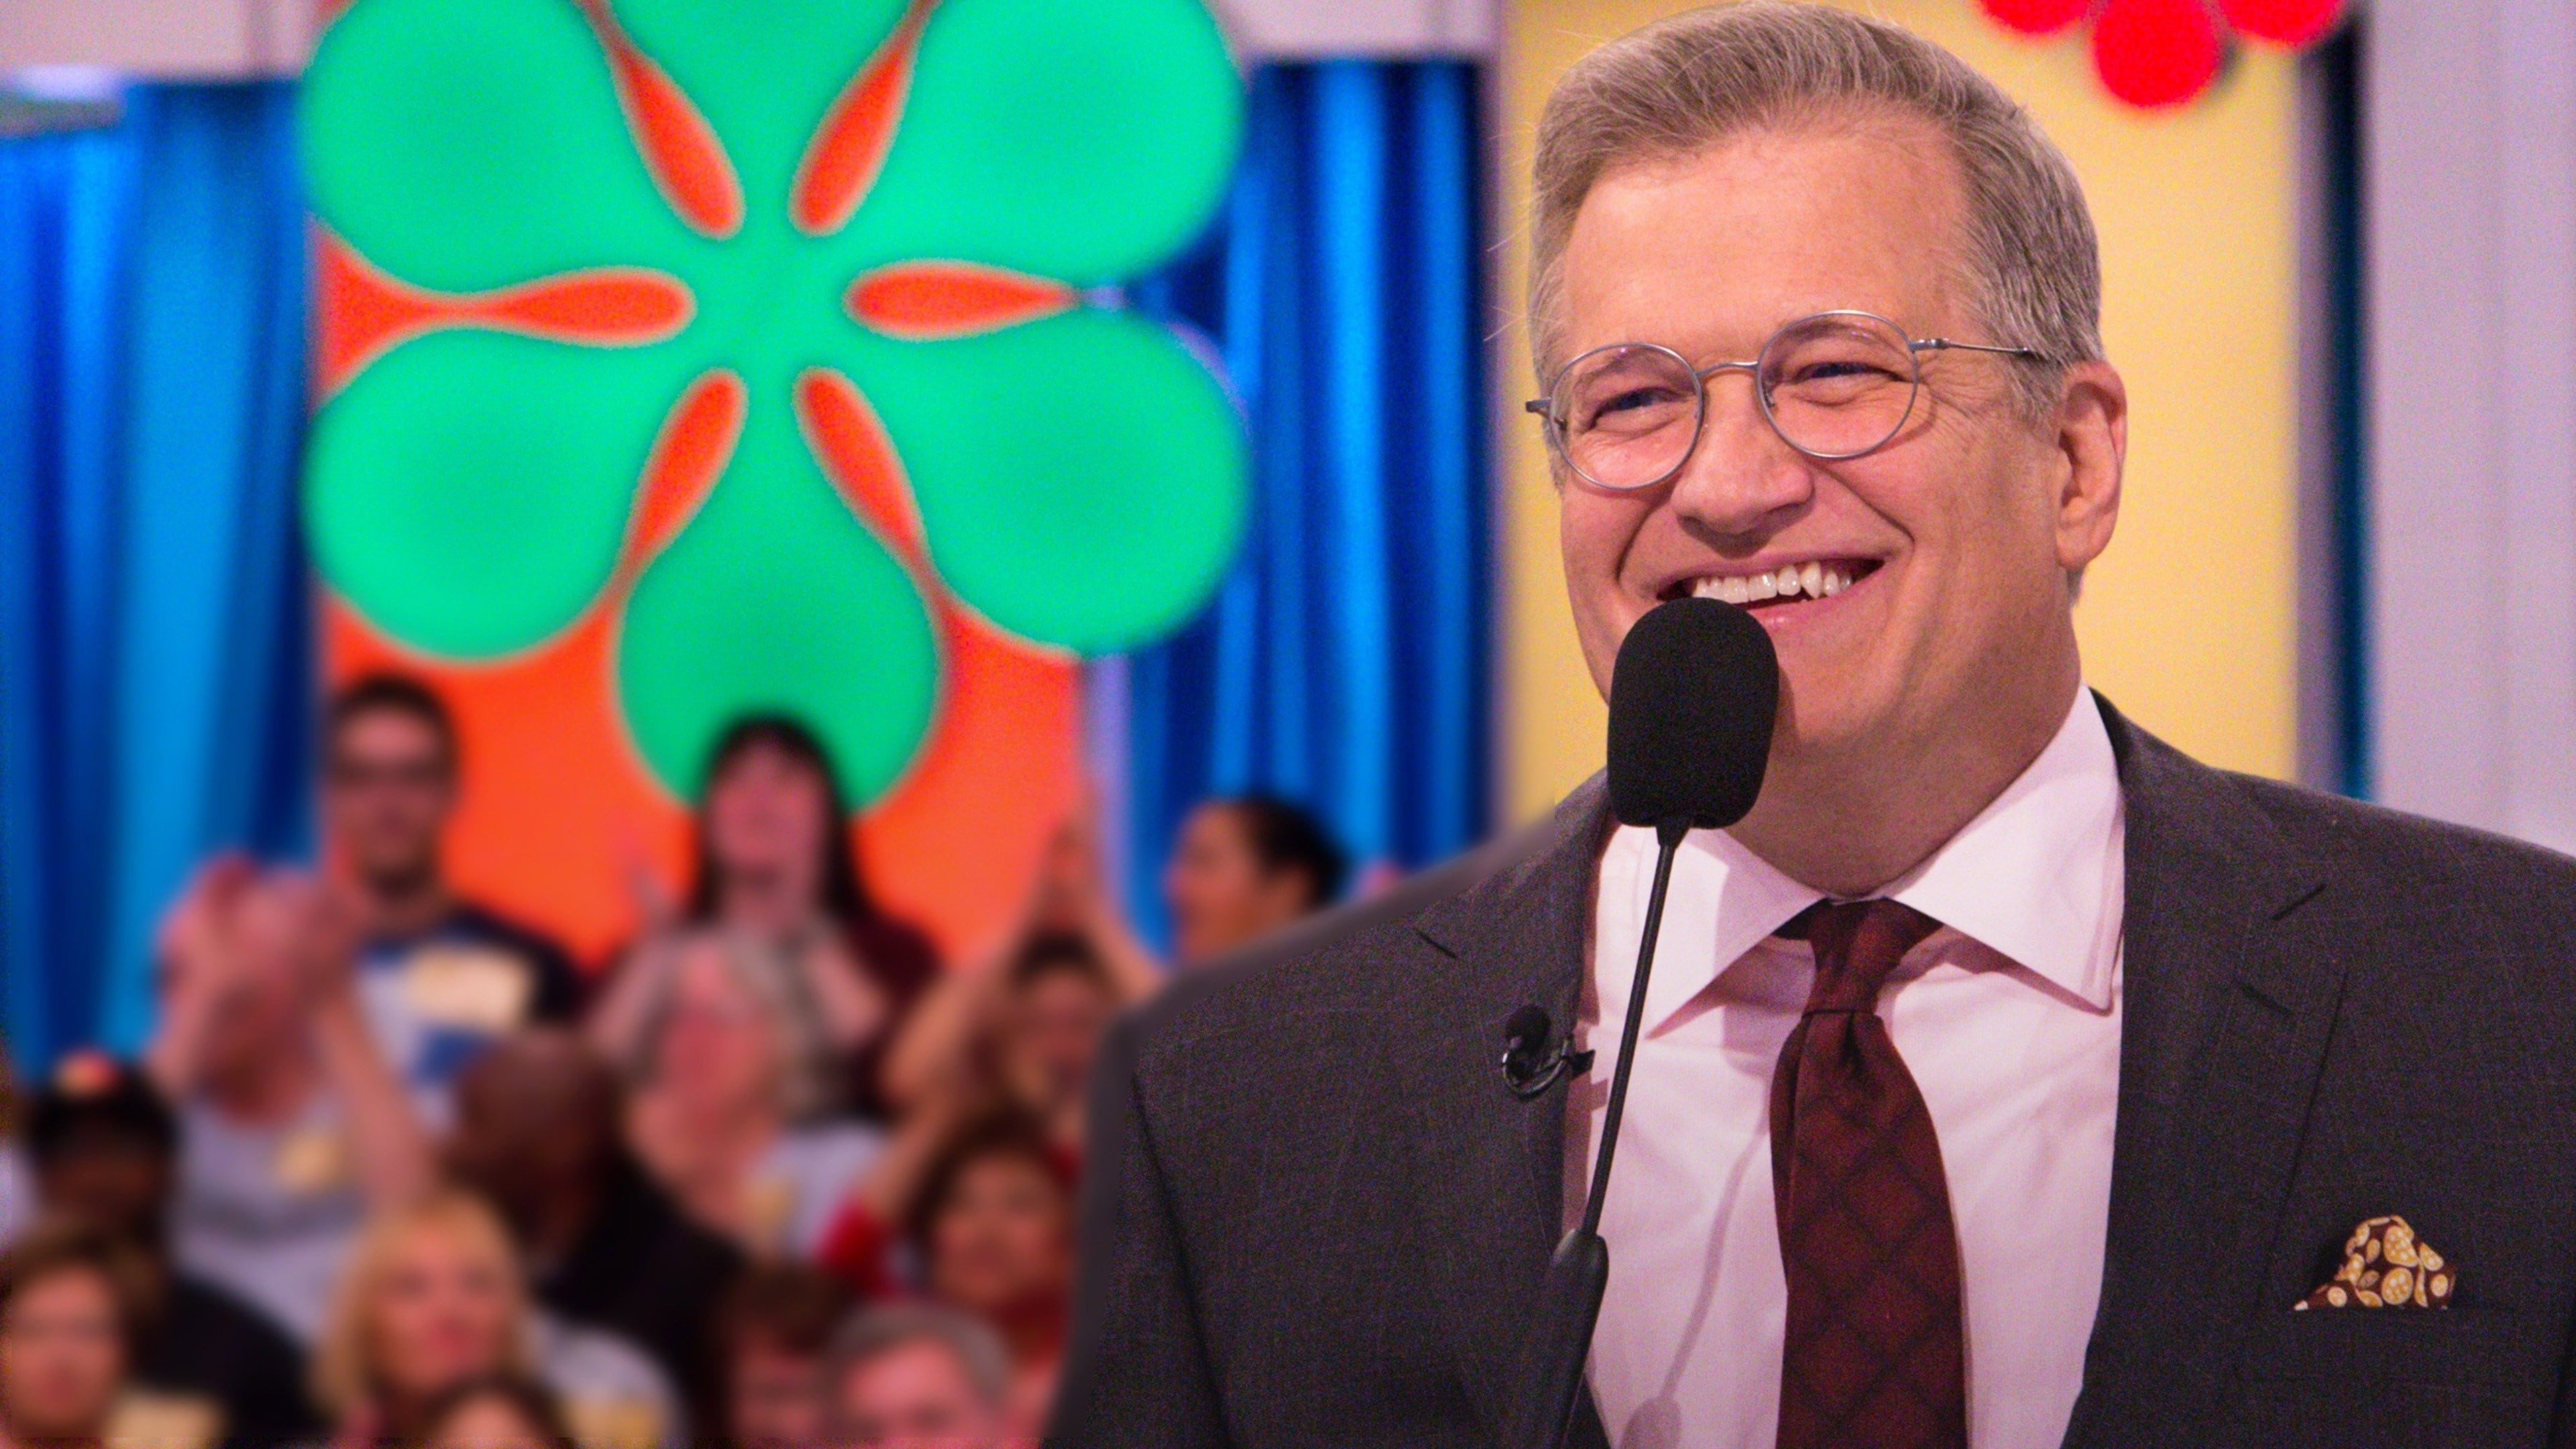 The Price Is Right - Season 6 Episode 153 : The Price Is Right Season 6 Episode 153